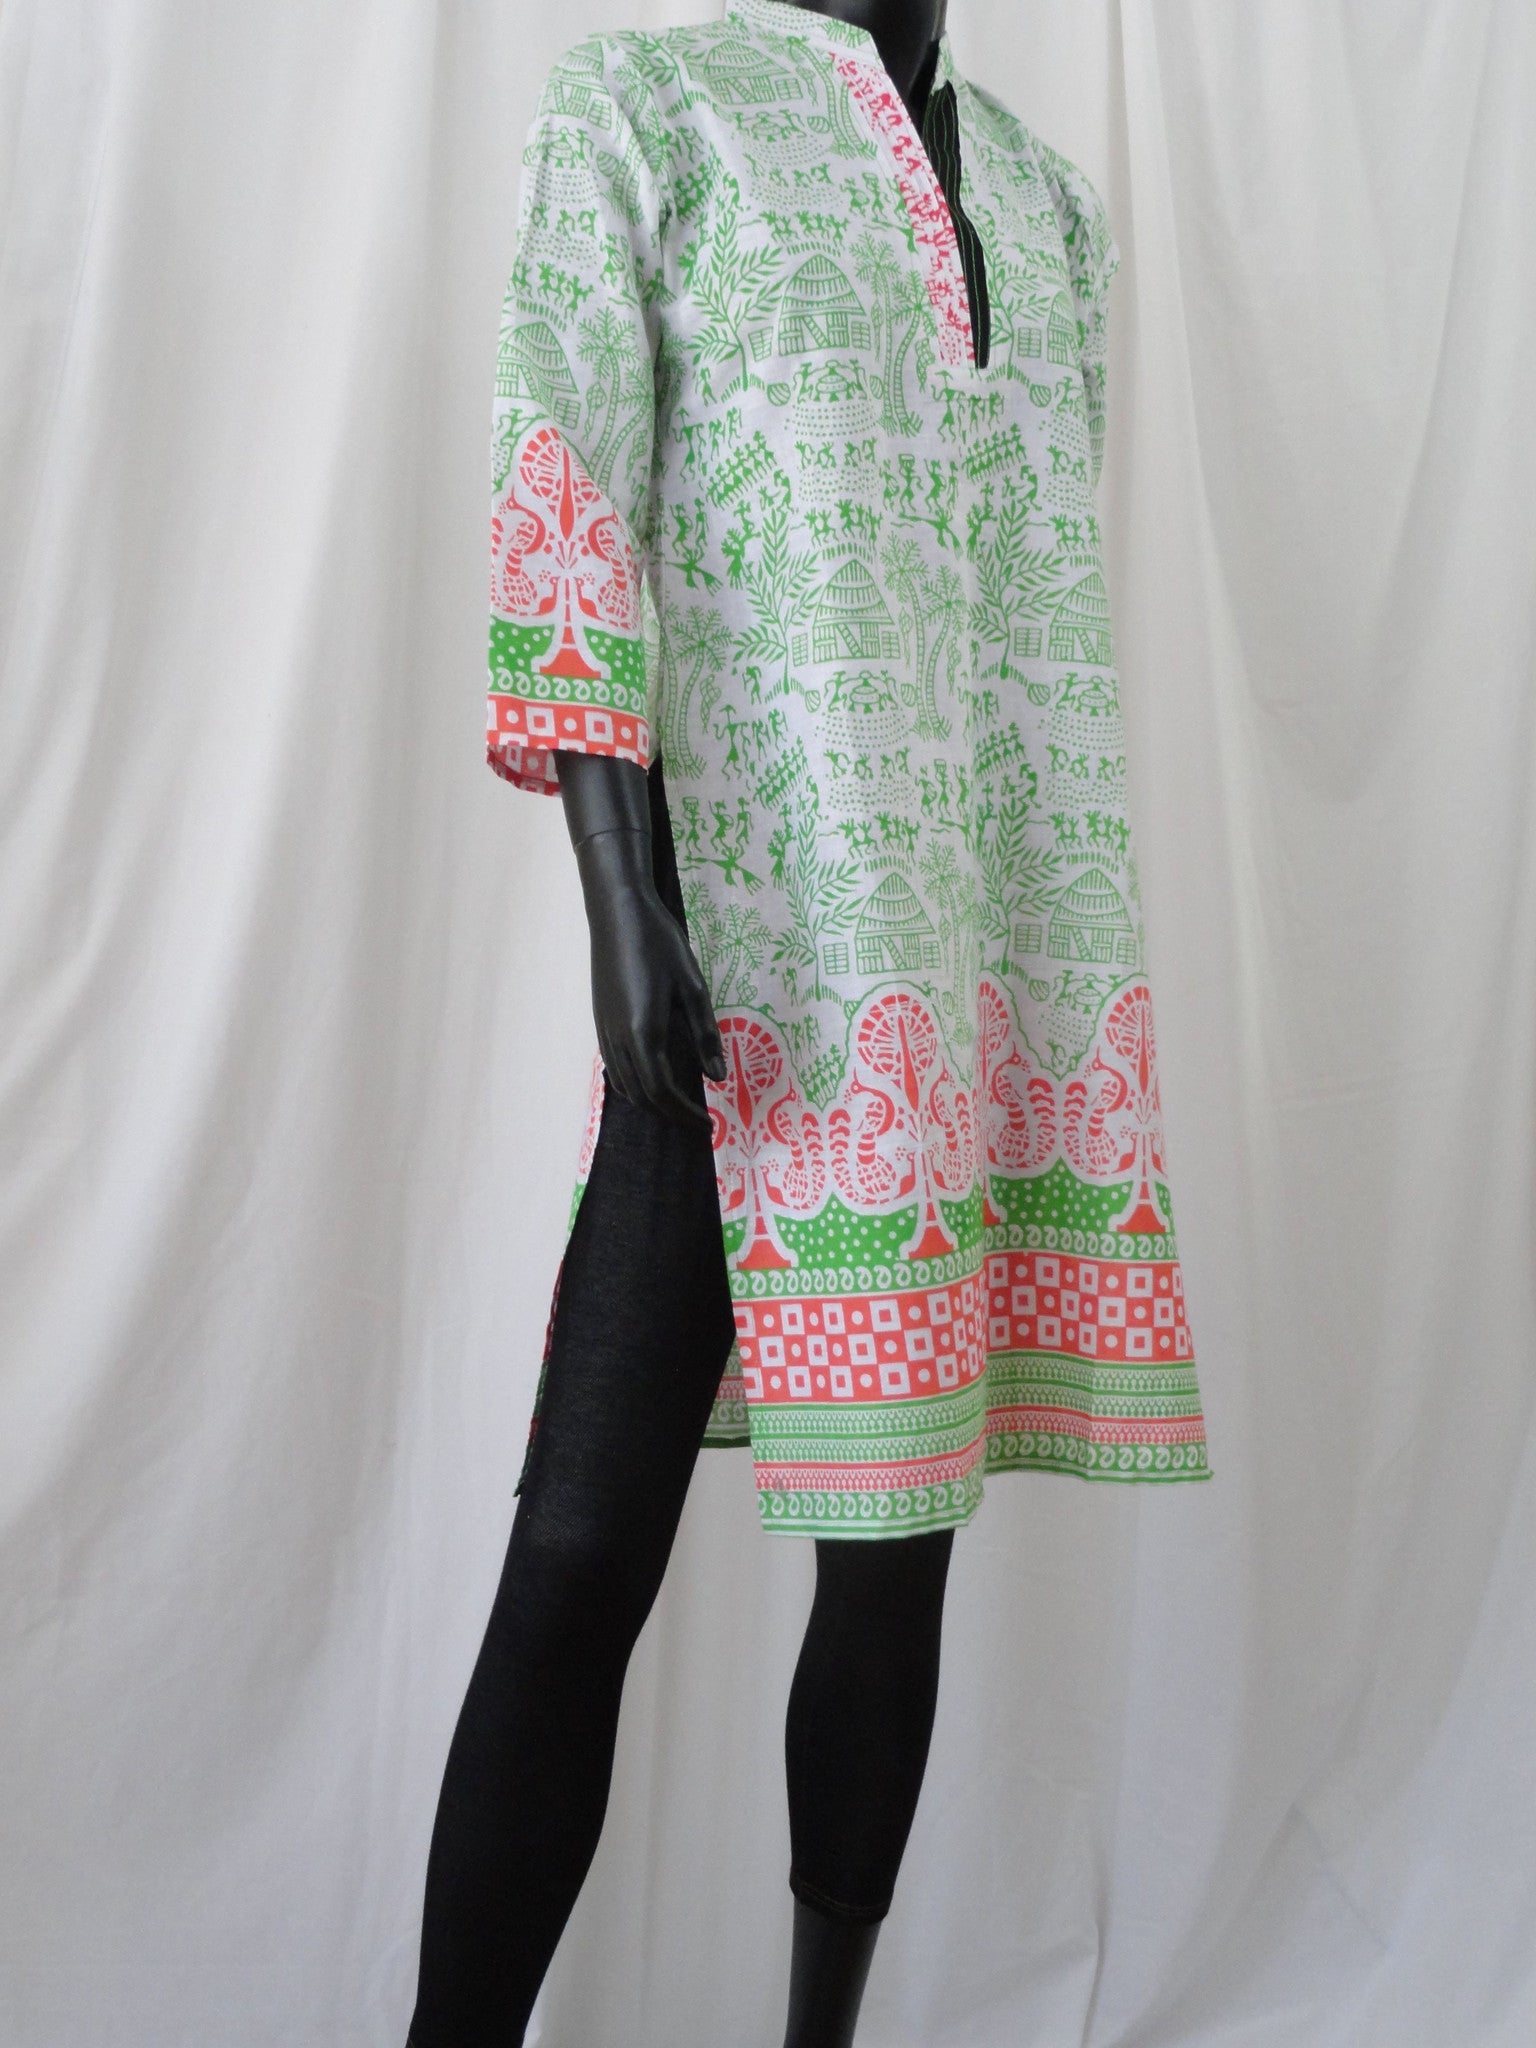 White Yoga tunic or top. Soft Cotton long dress top with cave art figu –  Artikrti